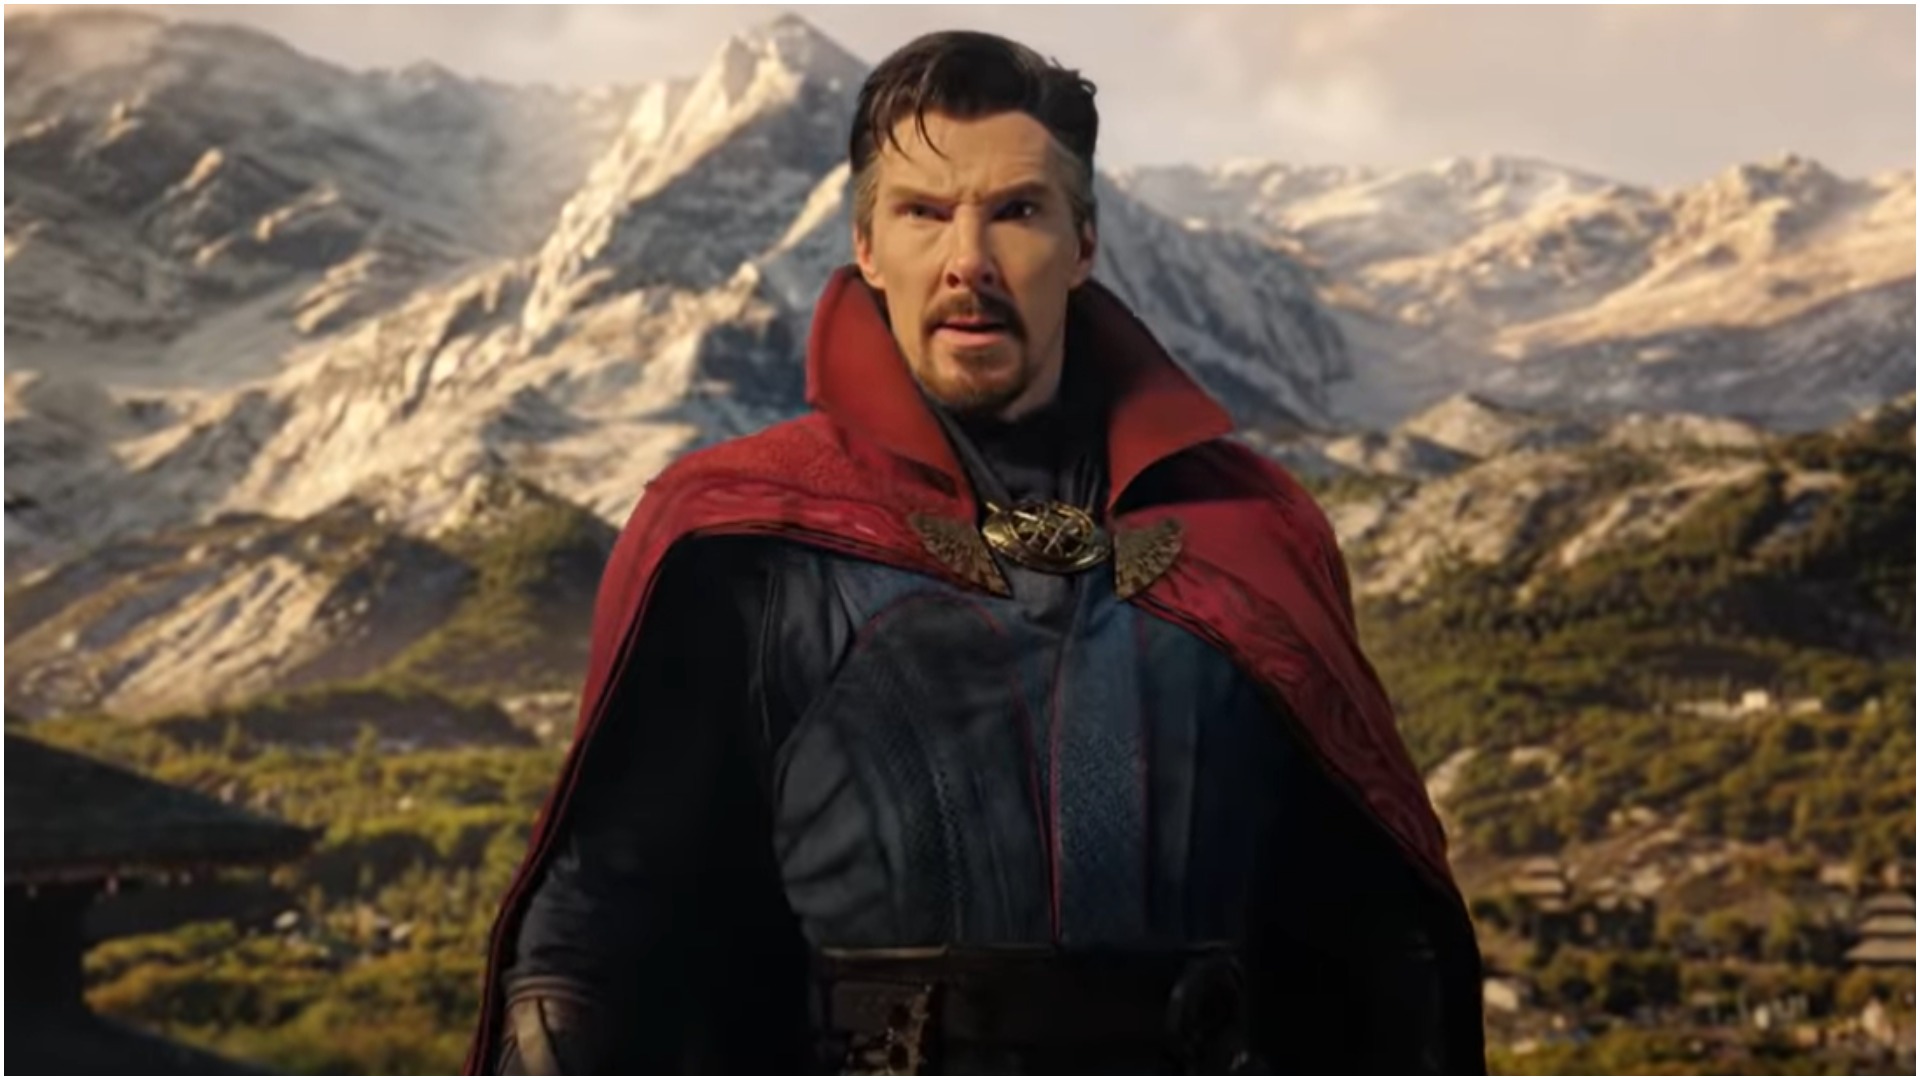 Dr. Strange Movie Tickets available now!